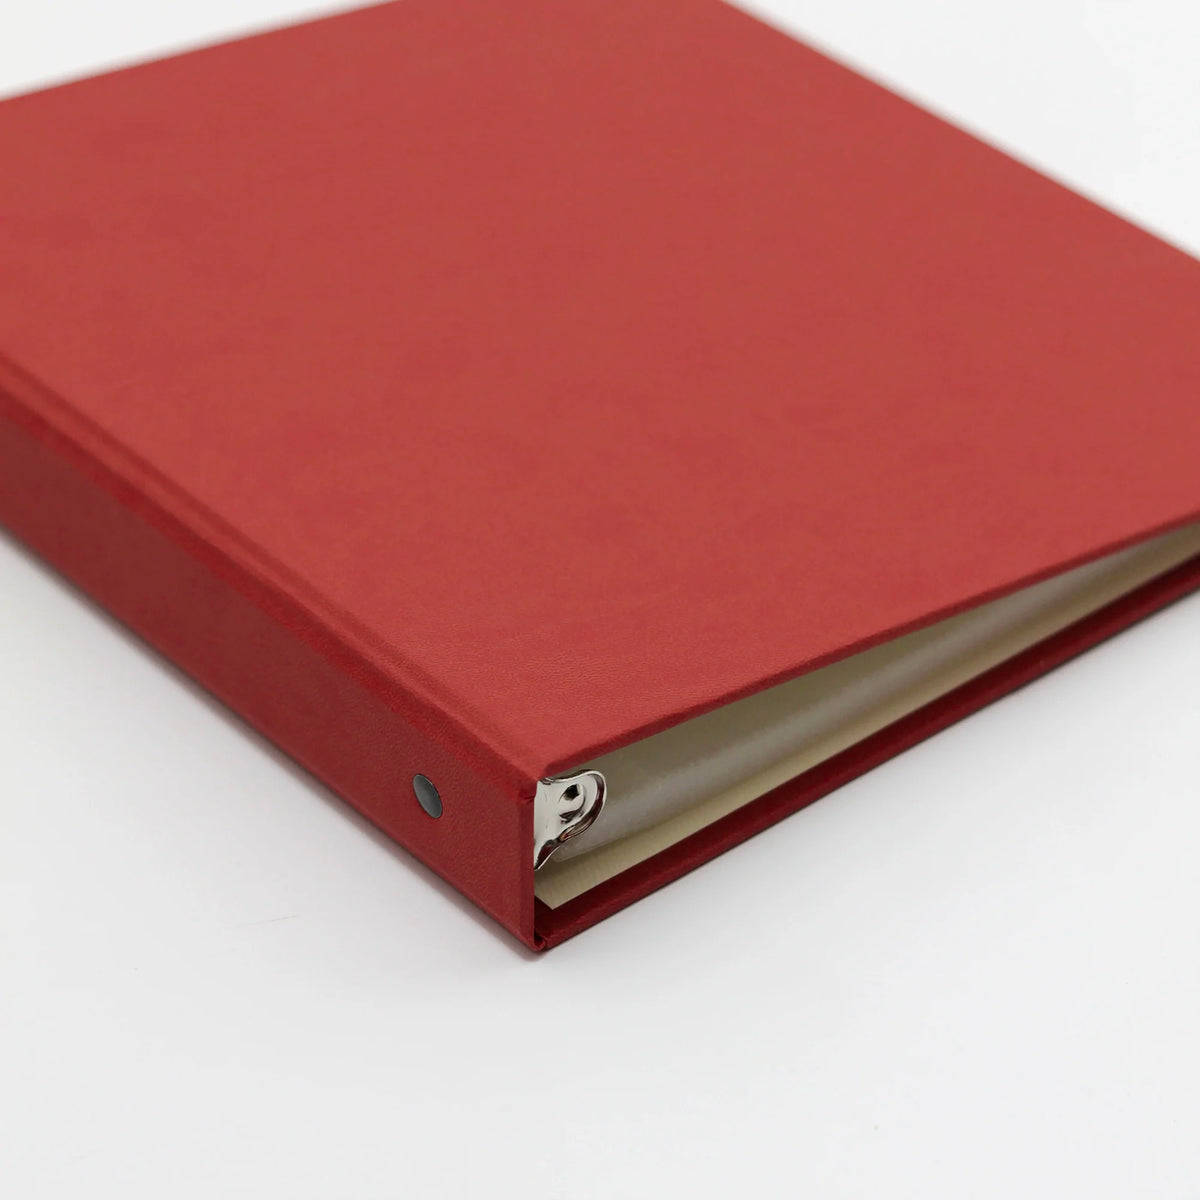 Recipe Journal Embossed with &quot;RECIPES&quot; covered with Red Faux Leather